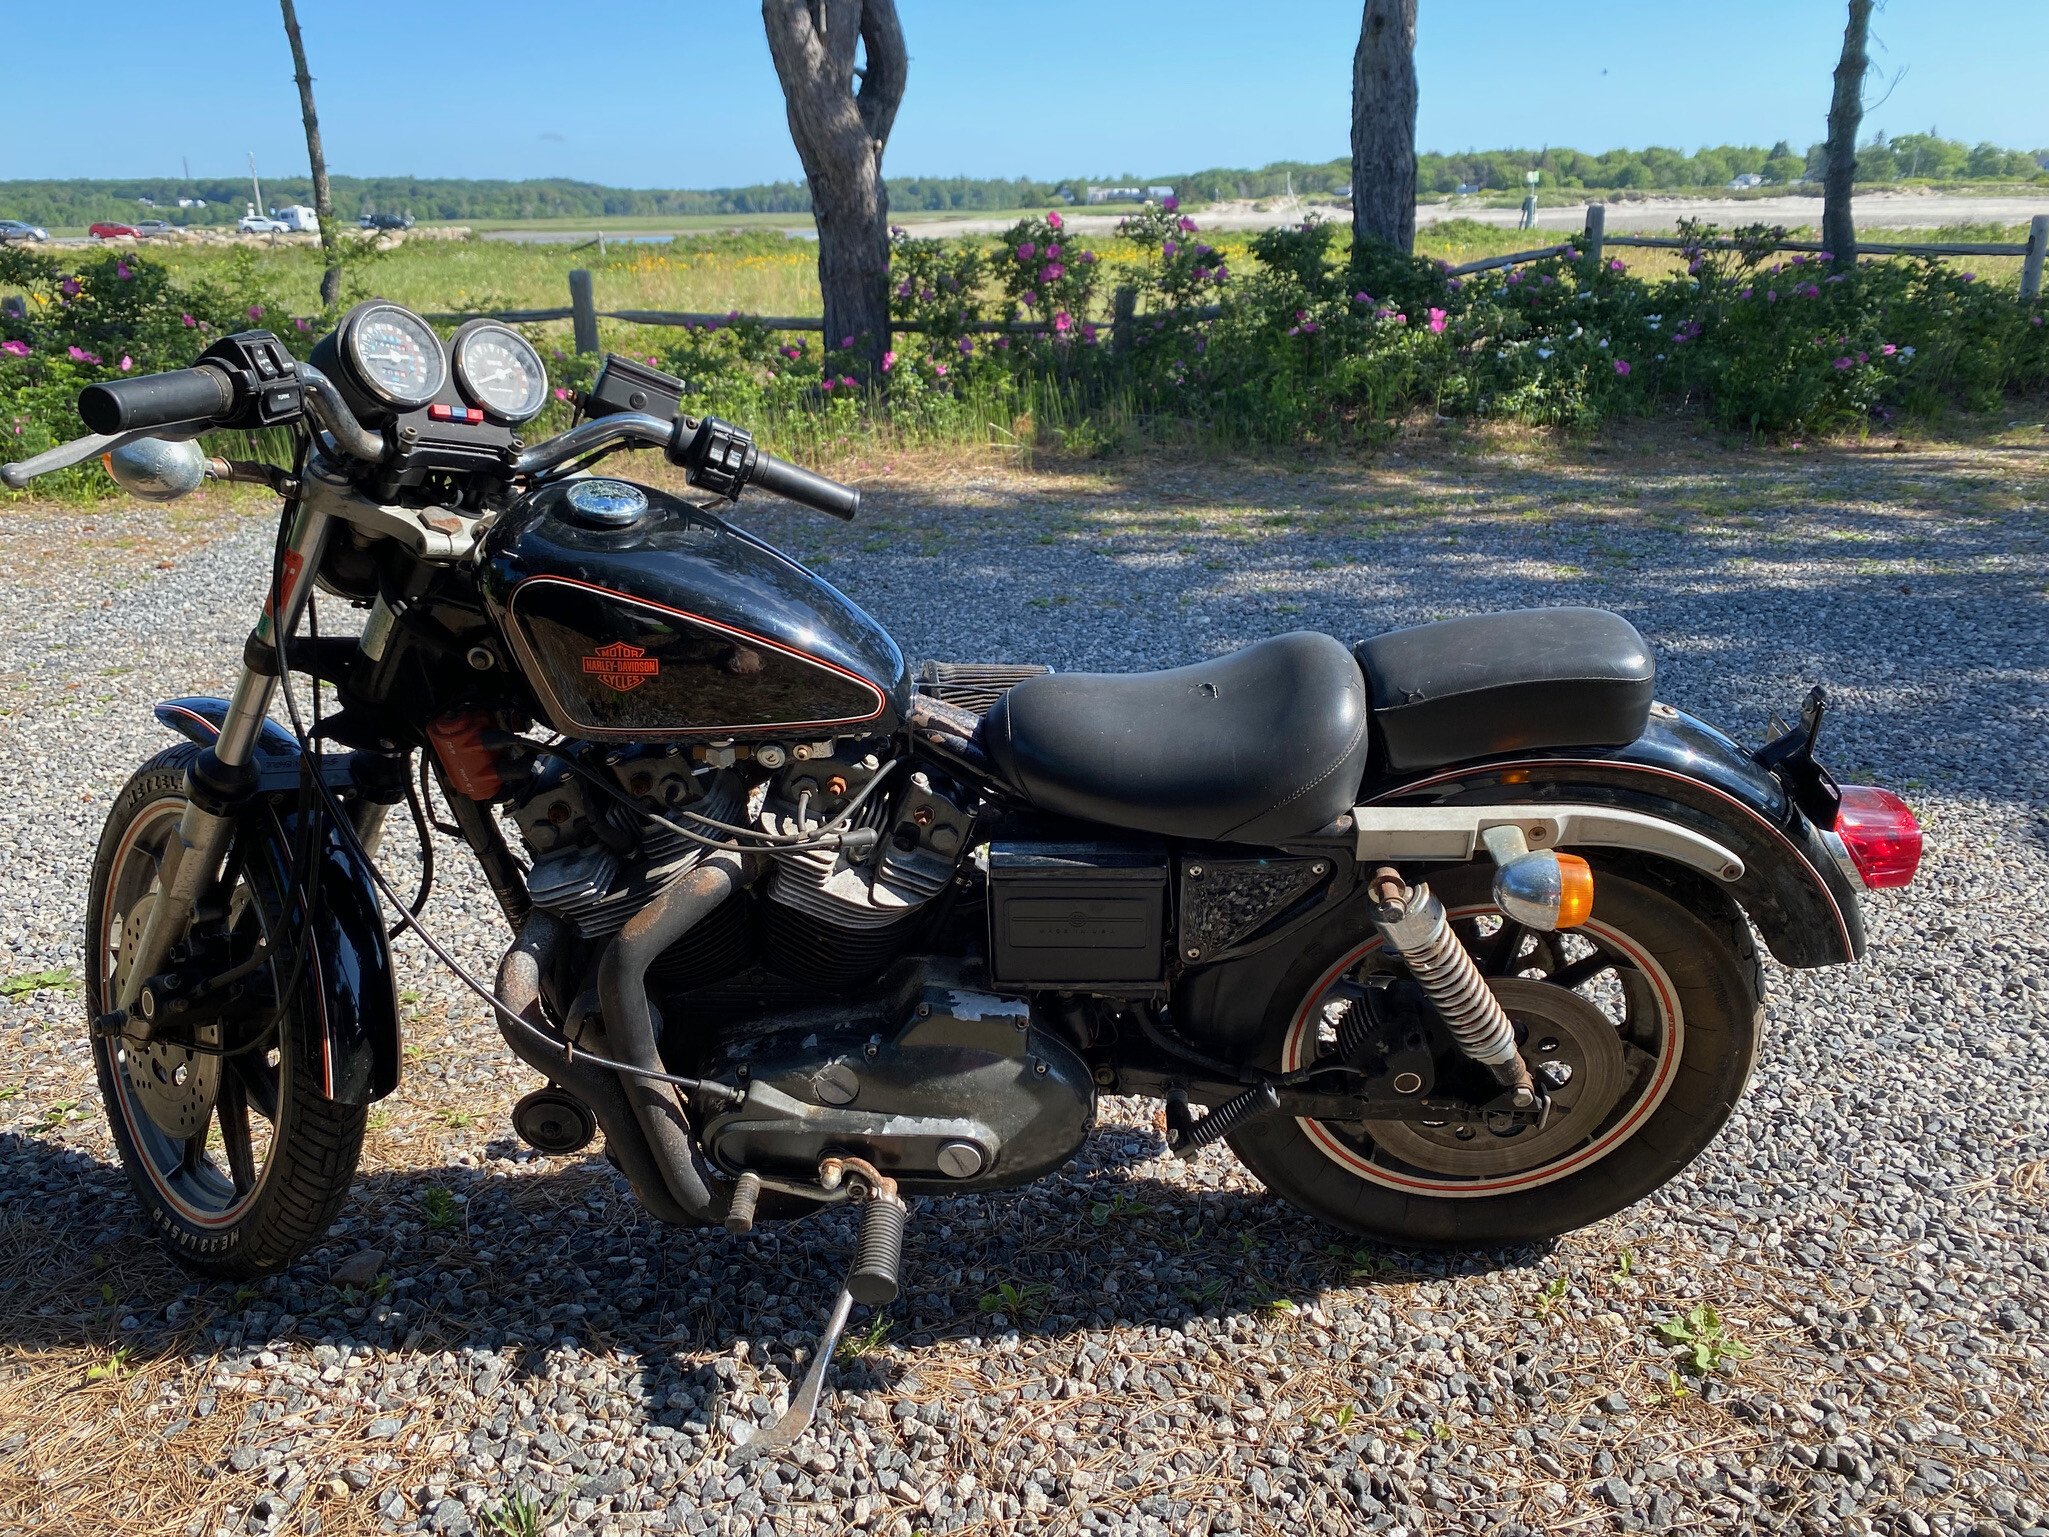 1983 Harley Davidson Sportster Motorcycles For Sale Motorcycles On Autotrader